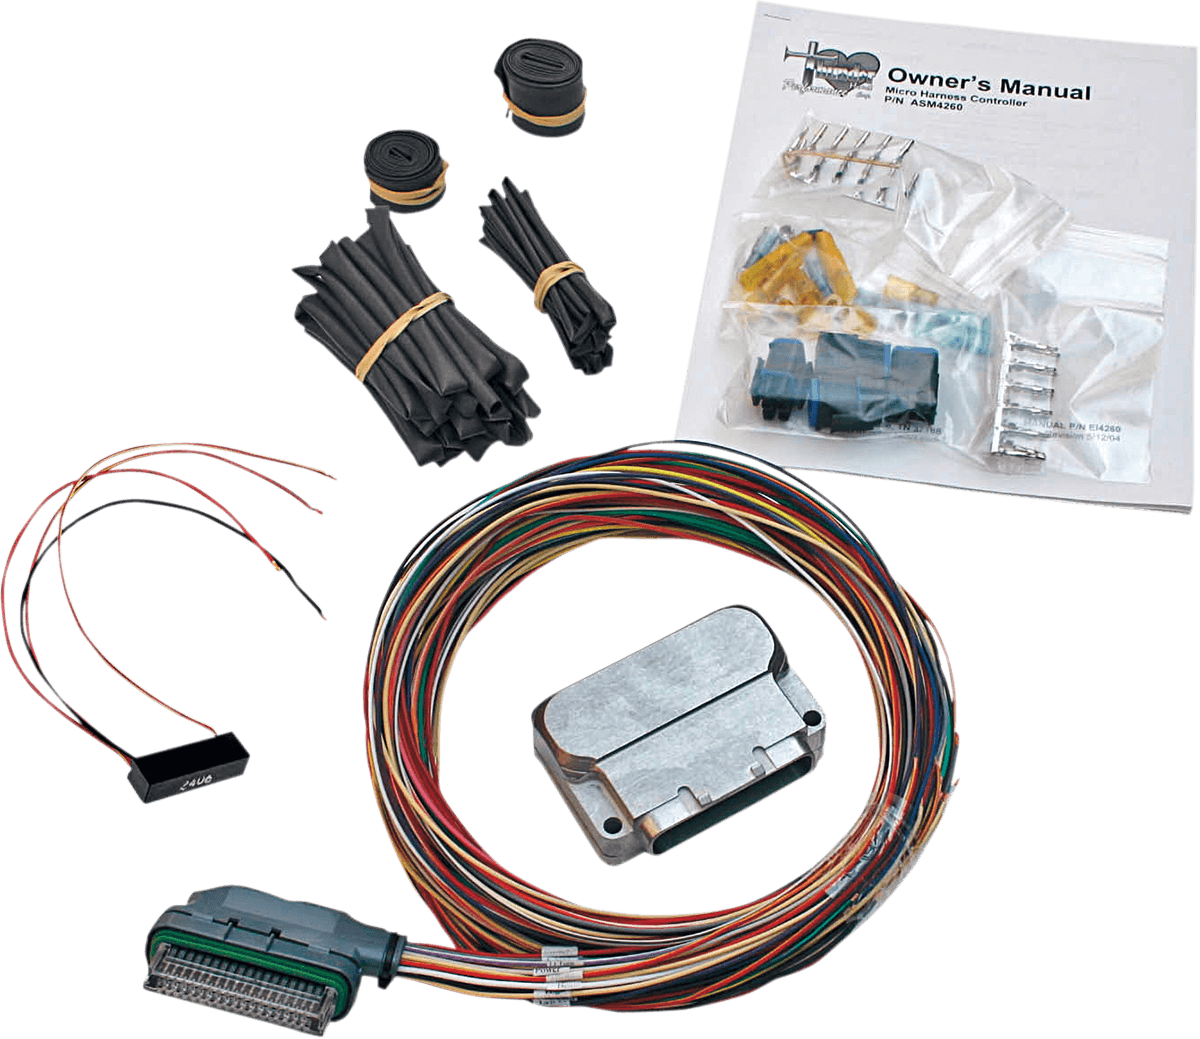 THUNDERMAX-Micro Harness Controller Kit-Wiring / Electrical-MetalCore Harley Supply